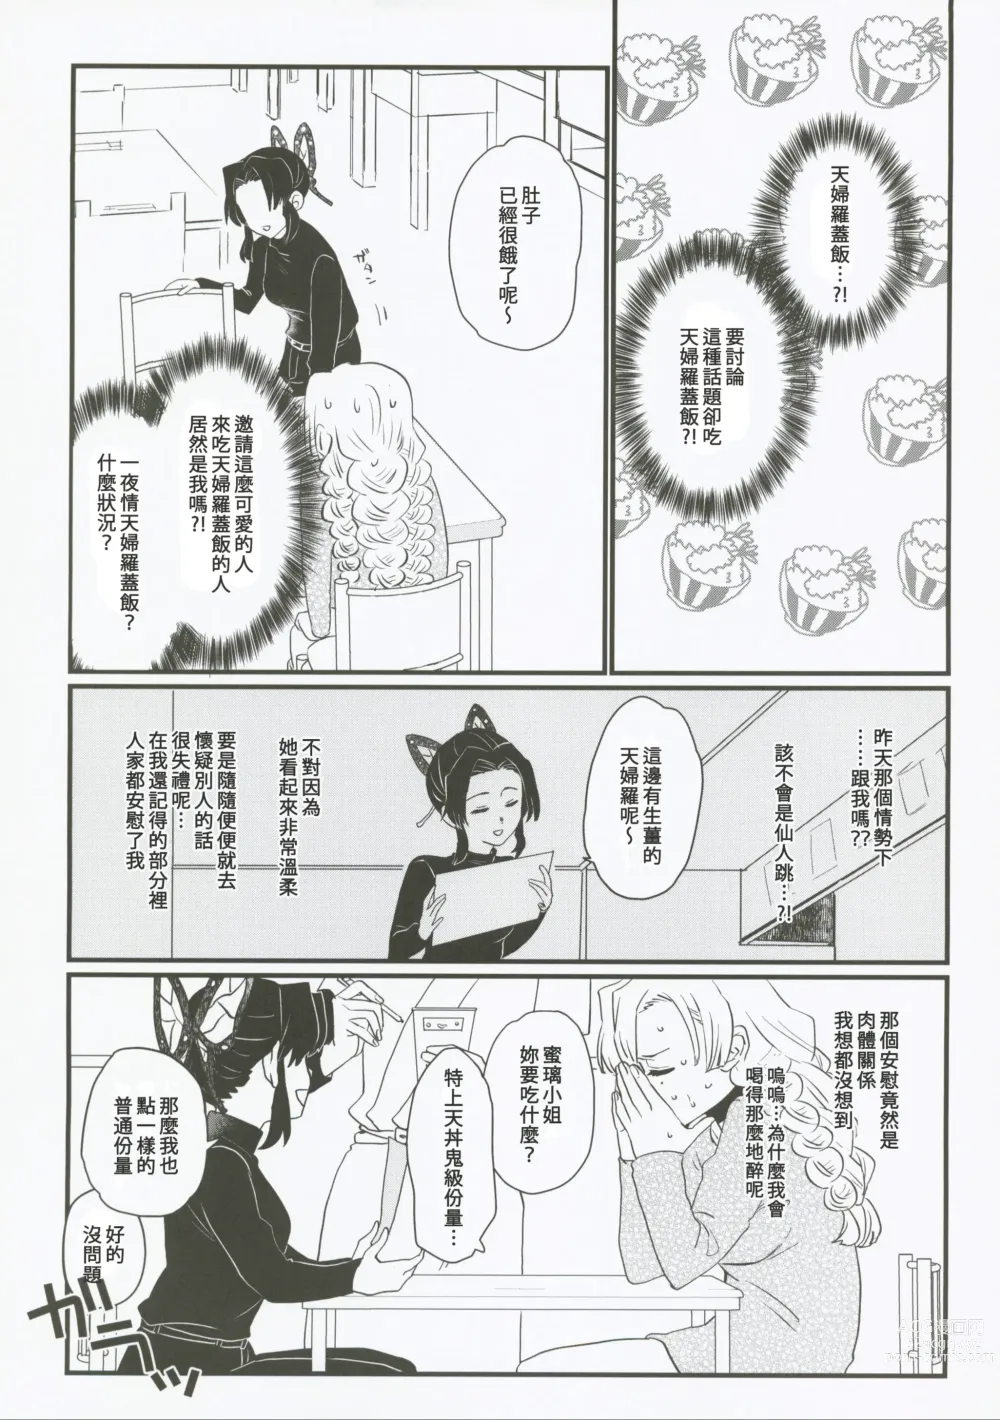 Page 17 of doujinshi 屬於妳的Omega